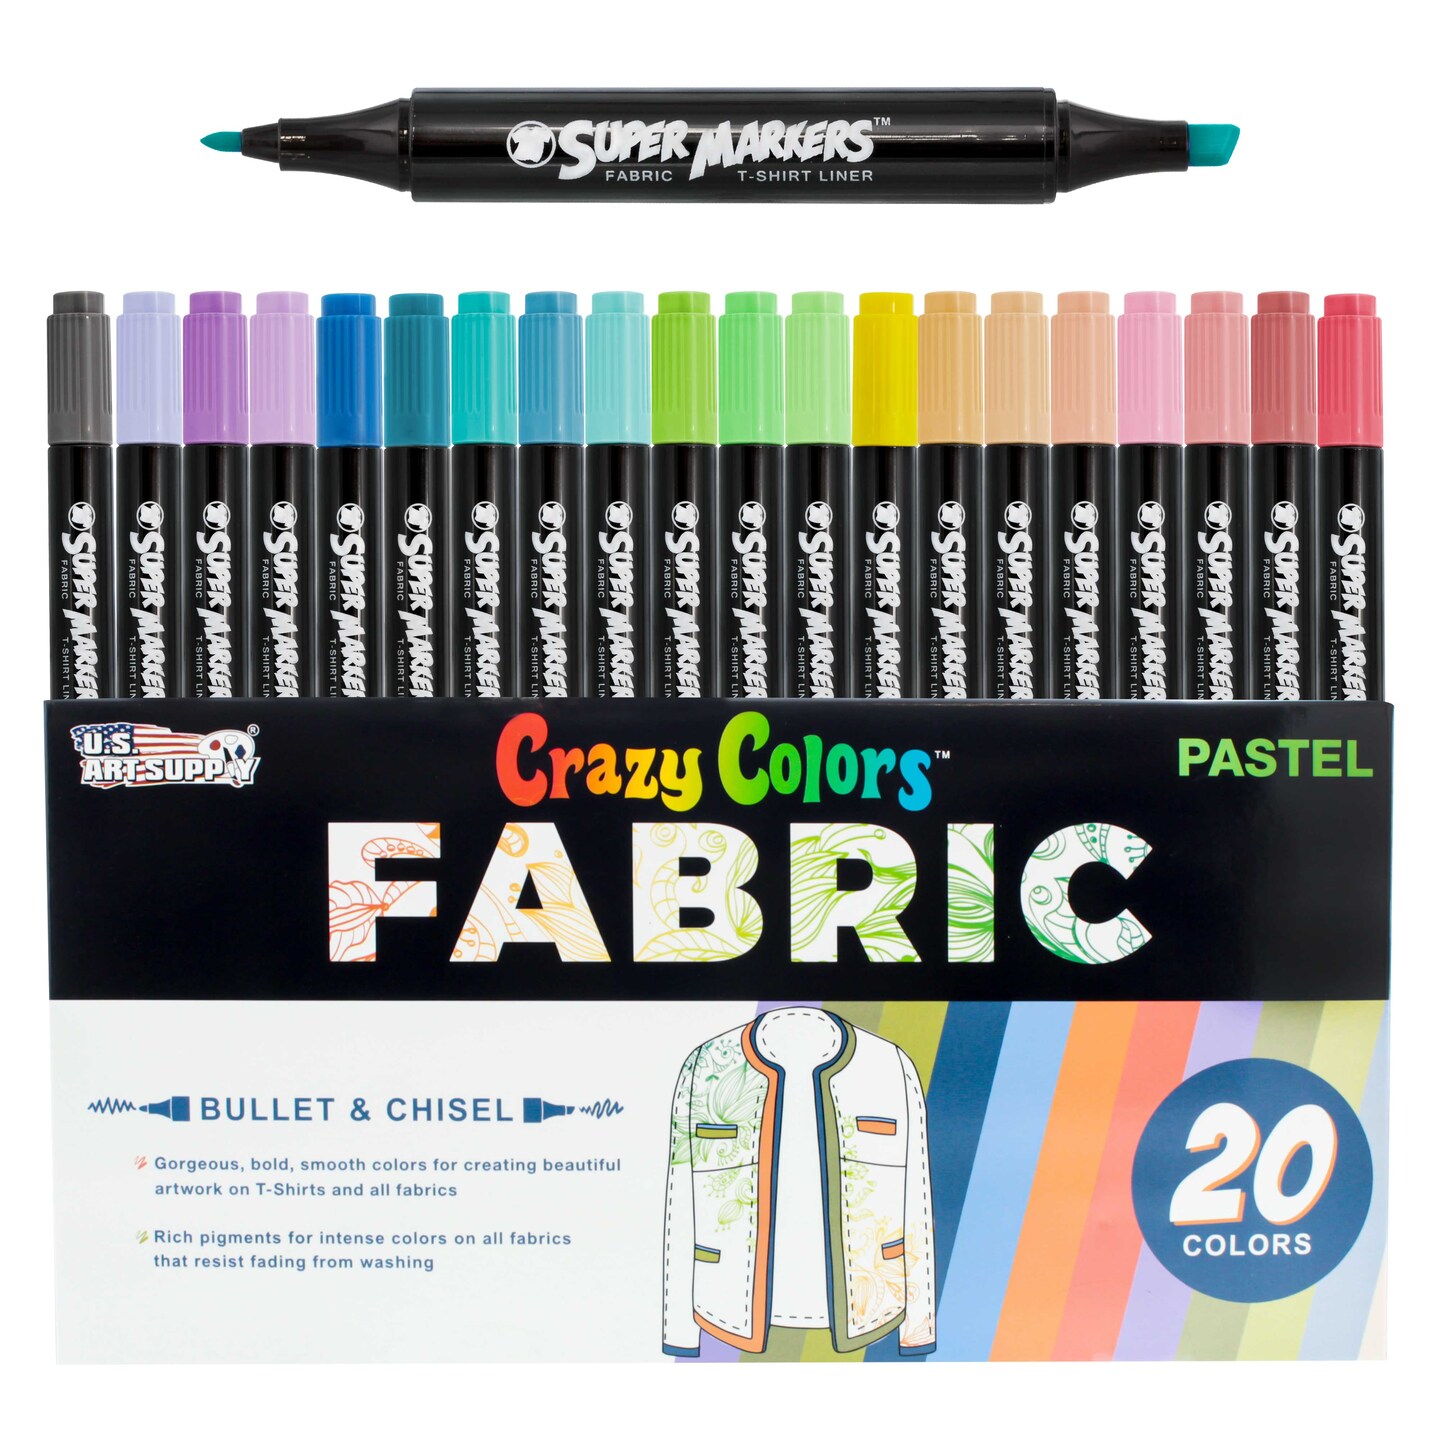 Fabric Markers for Baby Clothes Canvas Fabric Upholstery T Shirts Shoe Clothing  Paint Fabric Pens for Clothes, Fabric Markers Permanent No Bleed Coloring  Dye Pens 26 Pcs for Artists and Kids